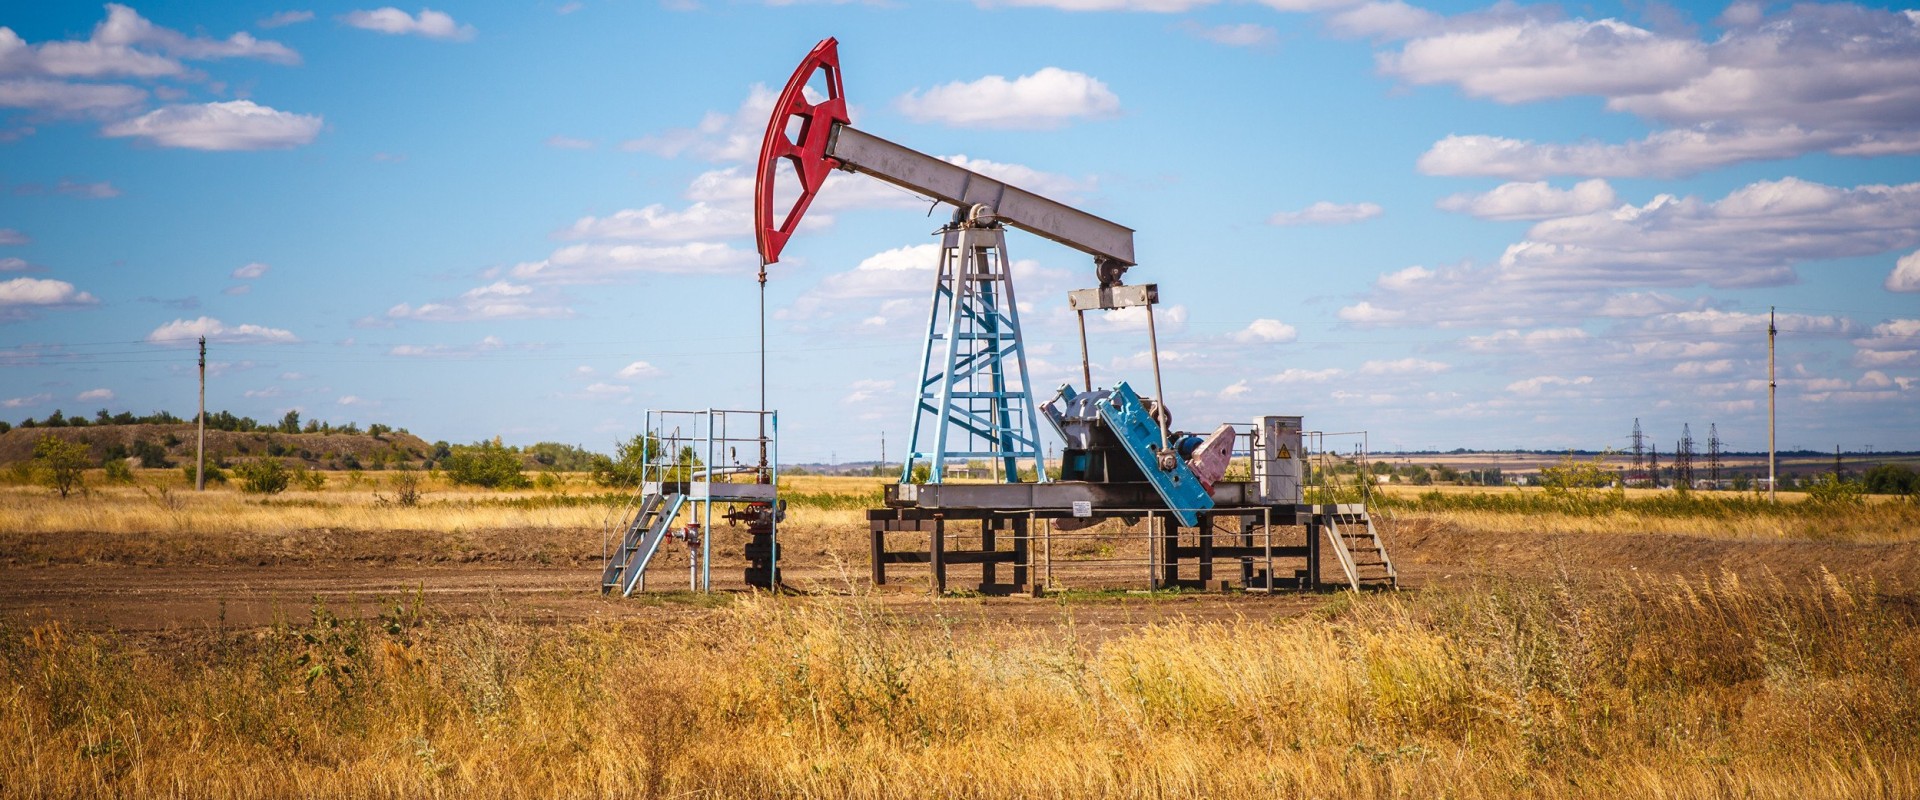 How Much Non-Renewable Oil is Produced Annually in Post Falls, Idaho?